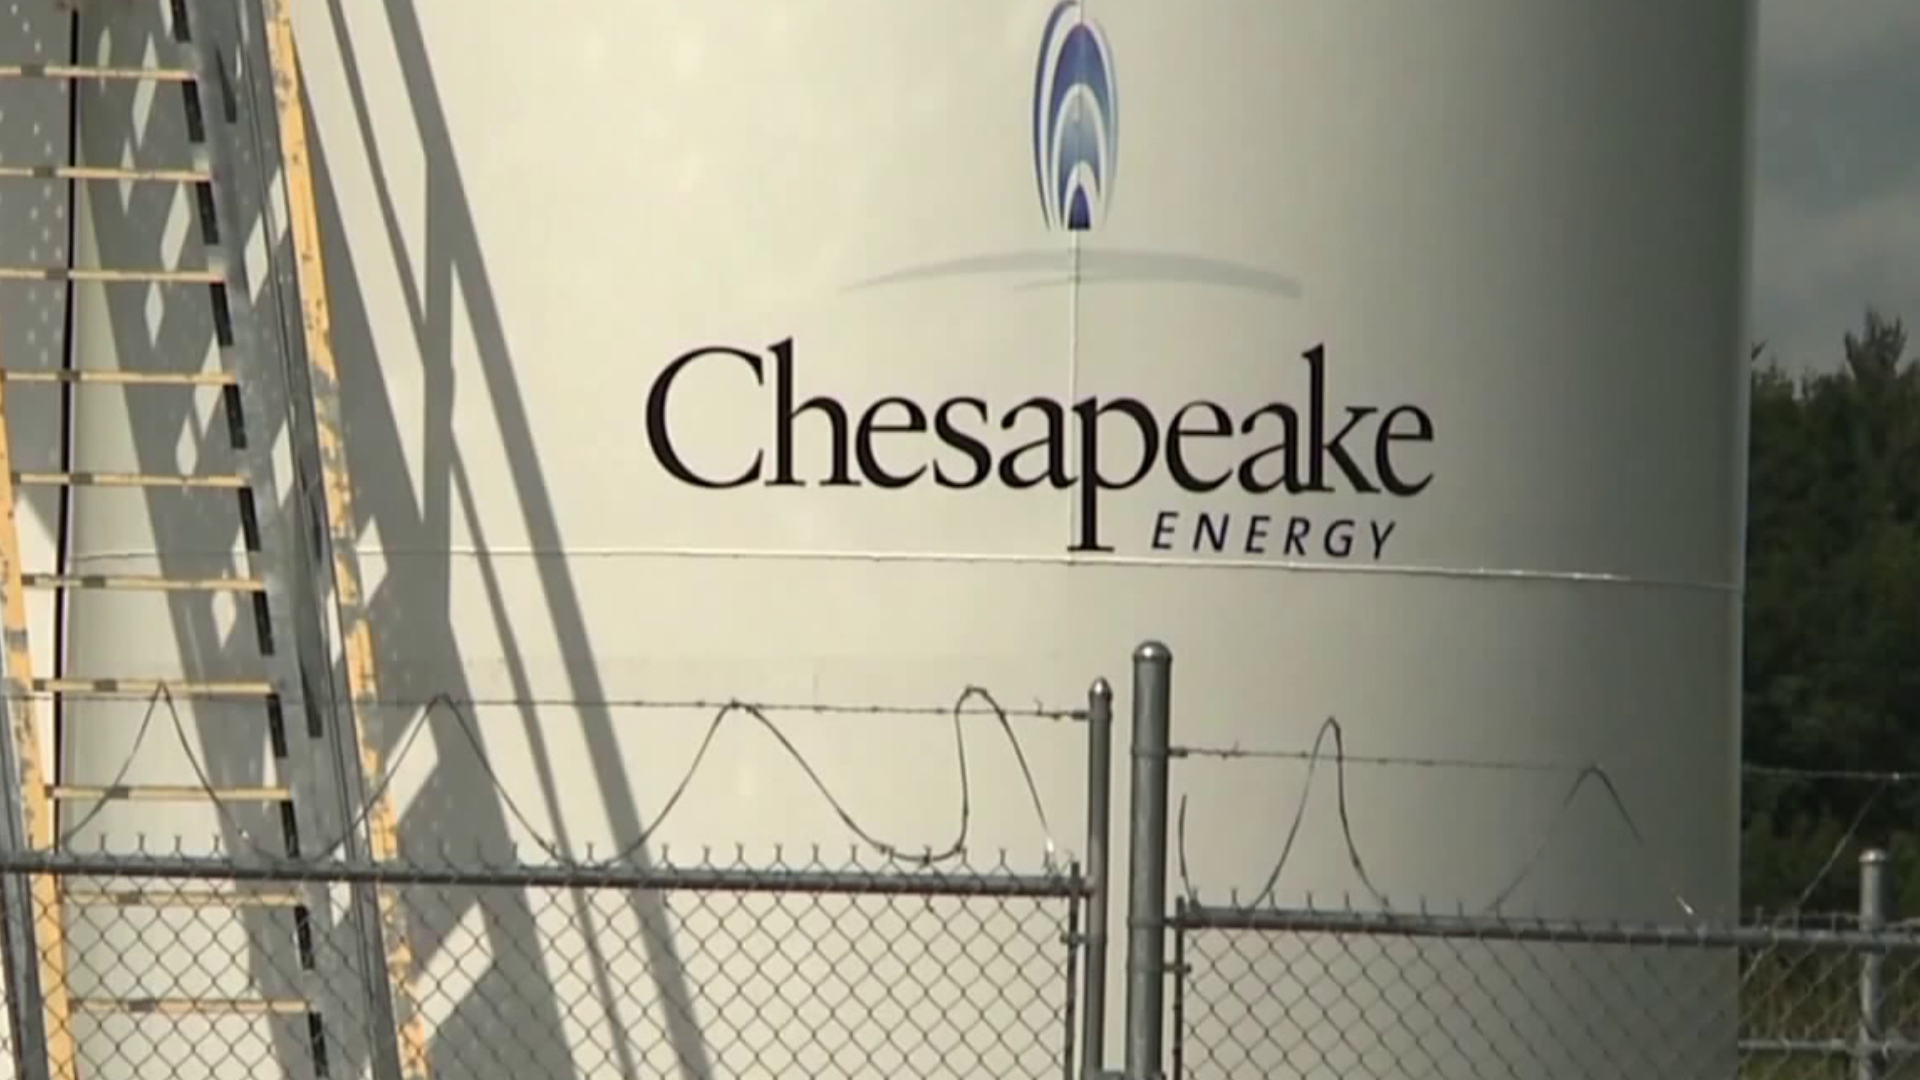 Chesapeake Energy filed for bankruptcy in June 2020.